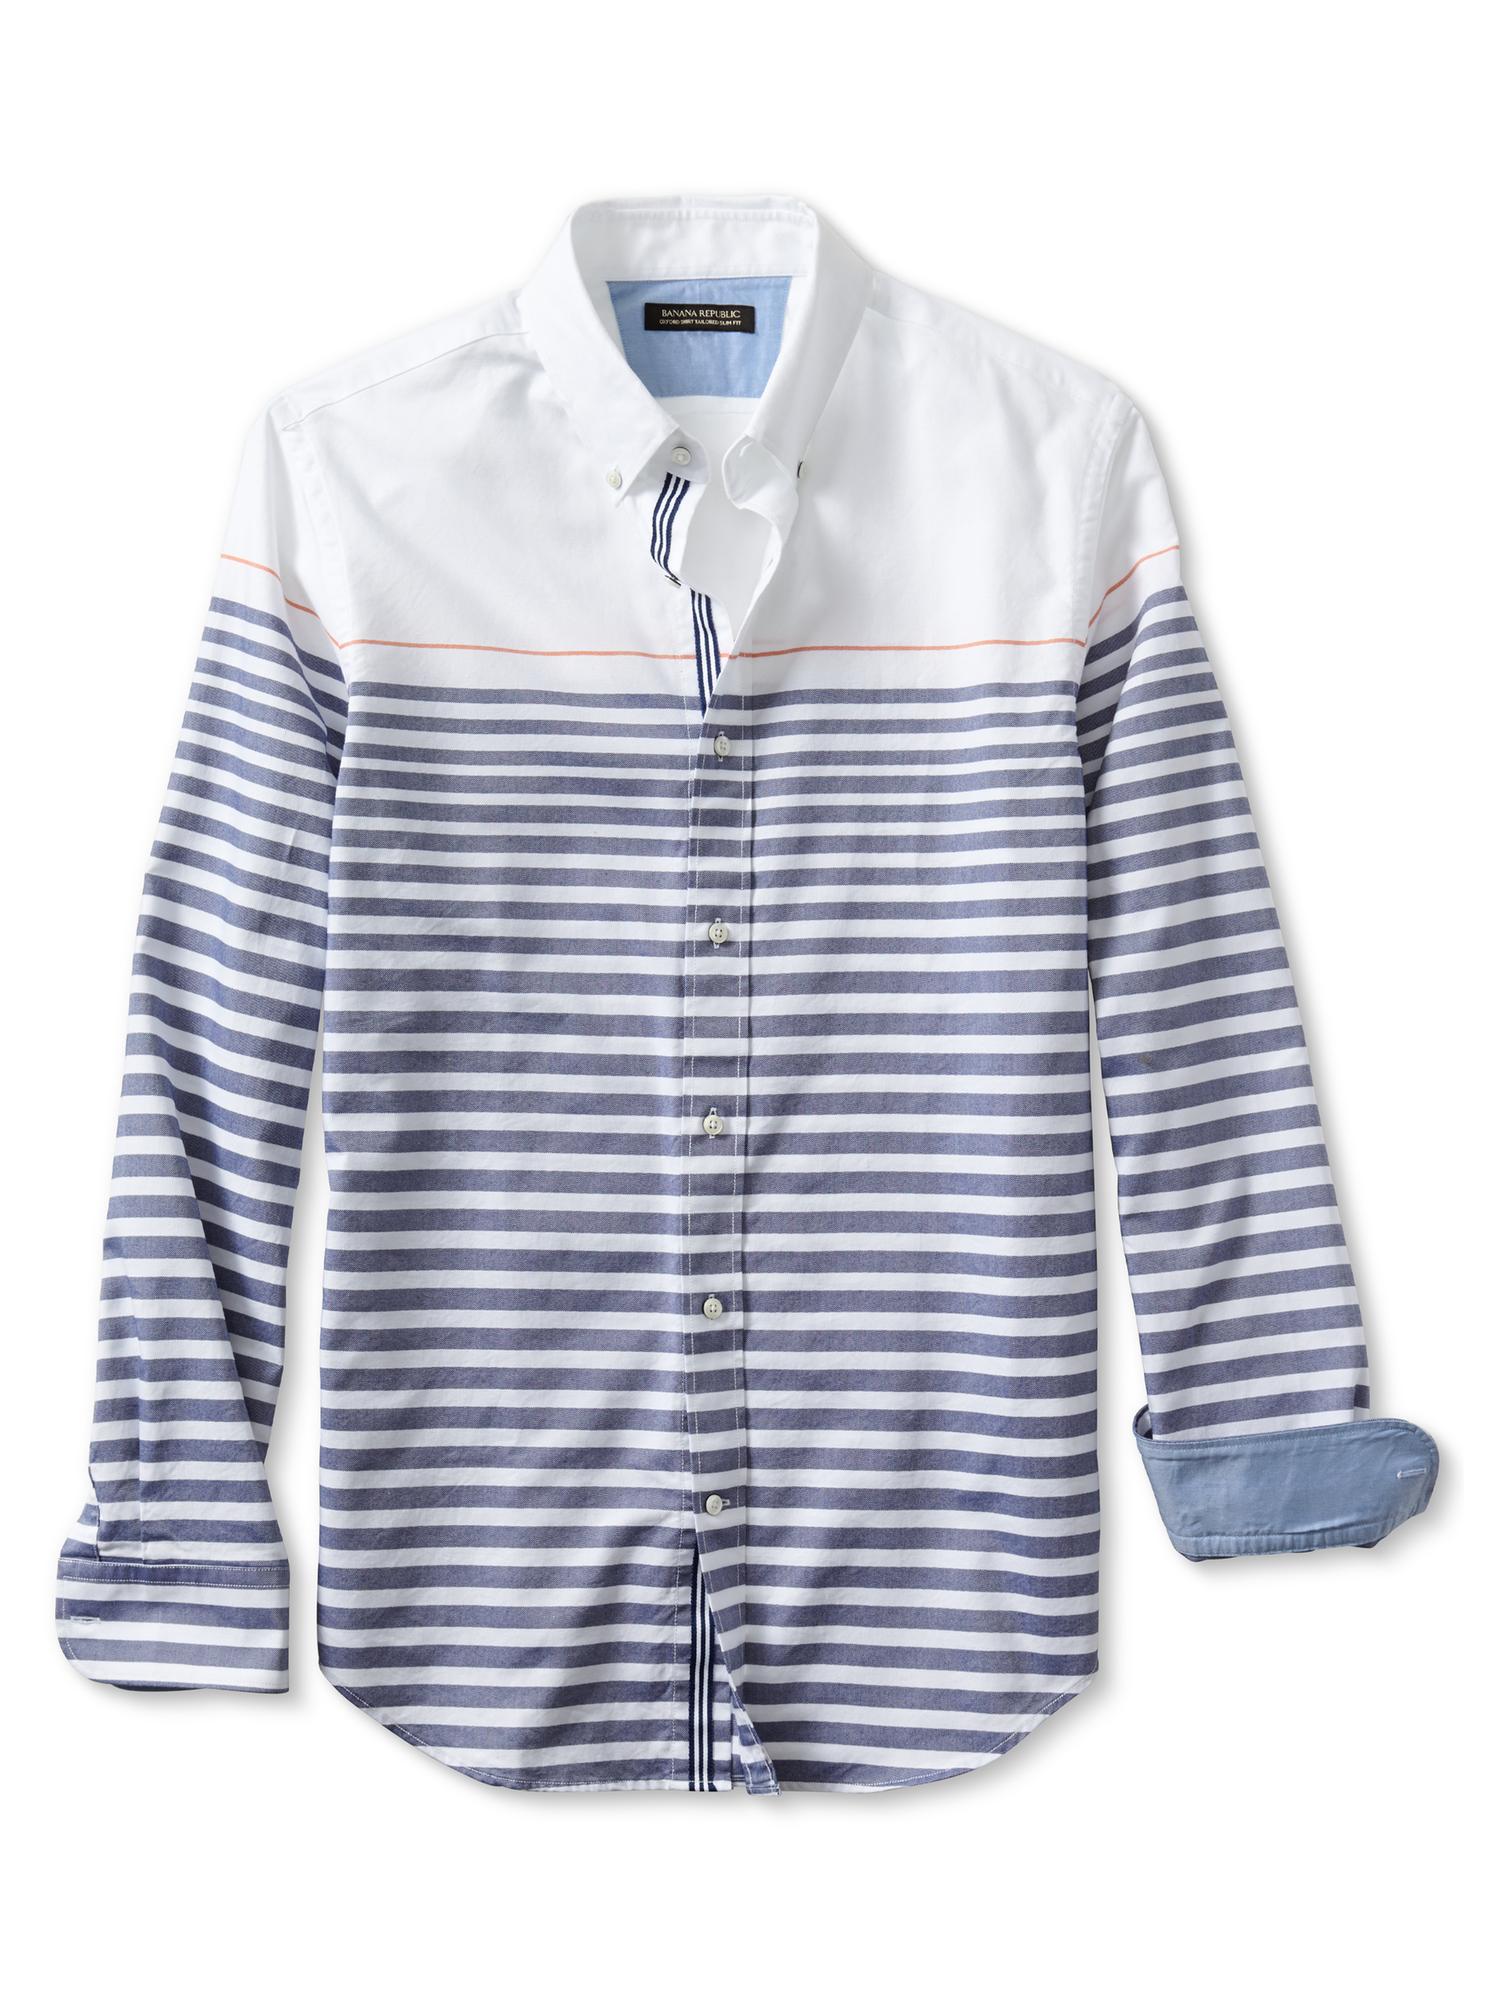 Tailored Slim-Fit Striped Oxford Shirt